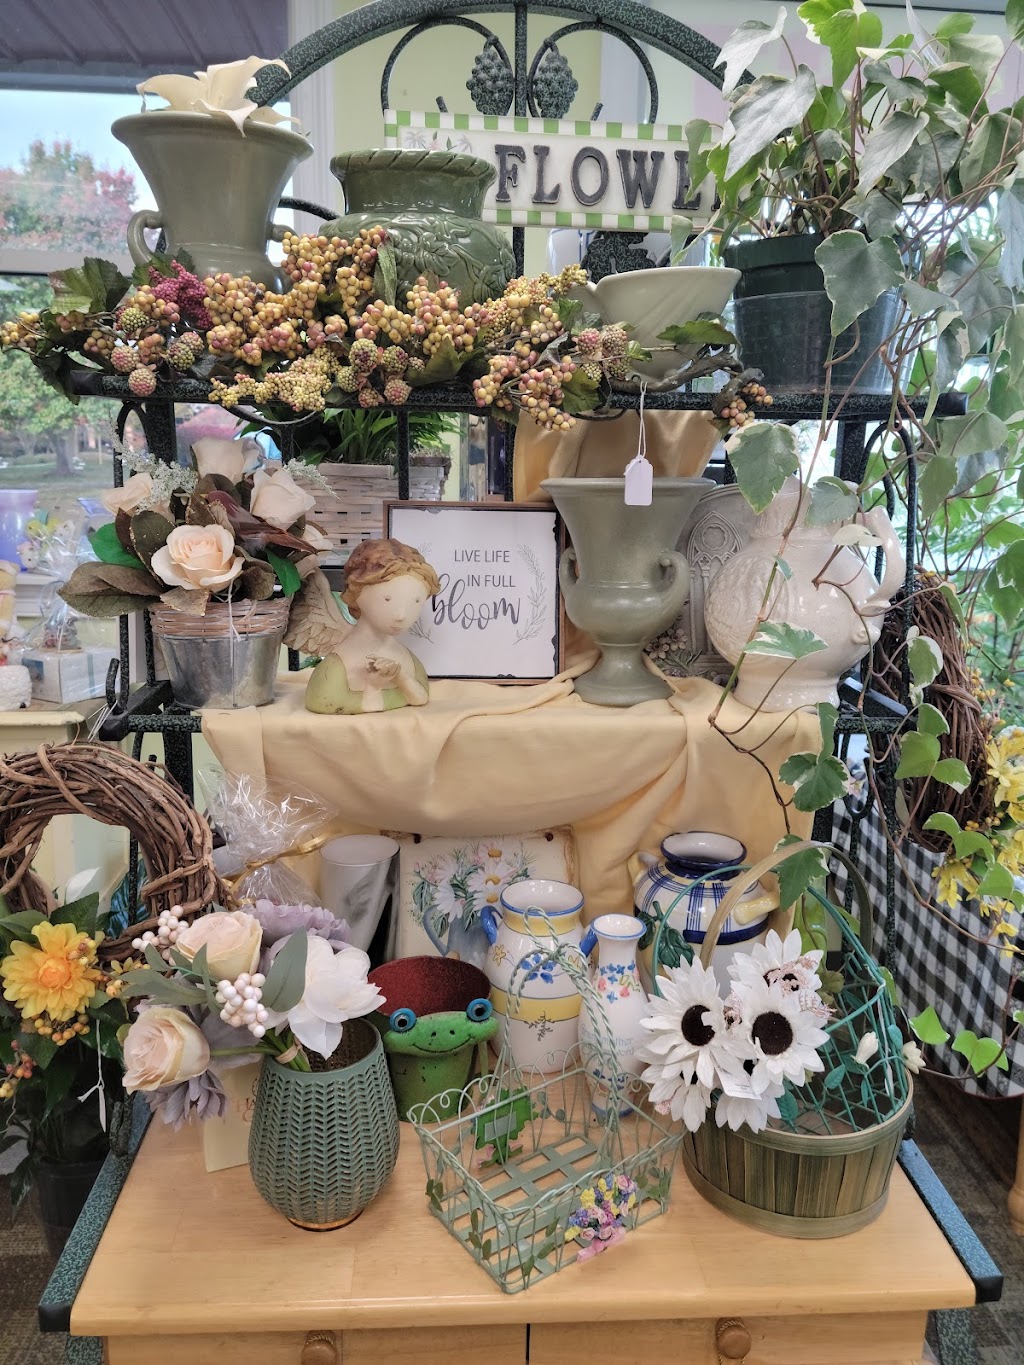 Hills And Dales Florist and Plants | 3030 Kettering Blvd, Kettering, OH 45439 | Phone: (937) 293-2179